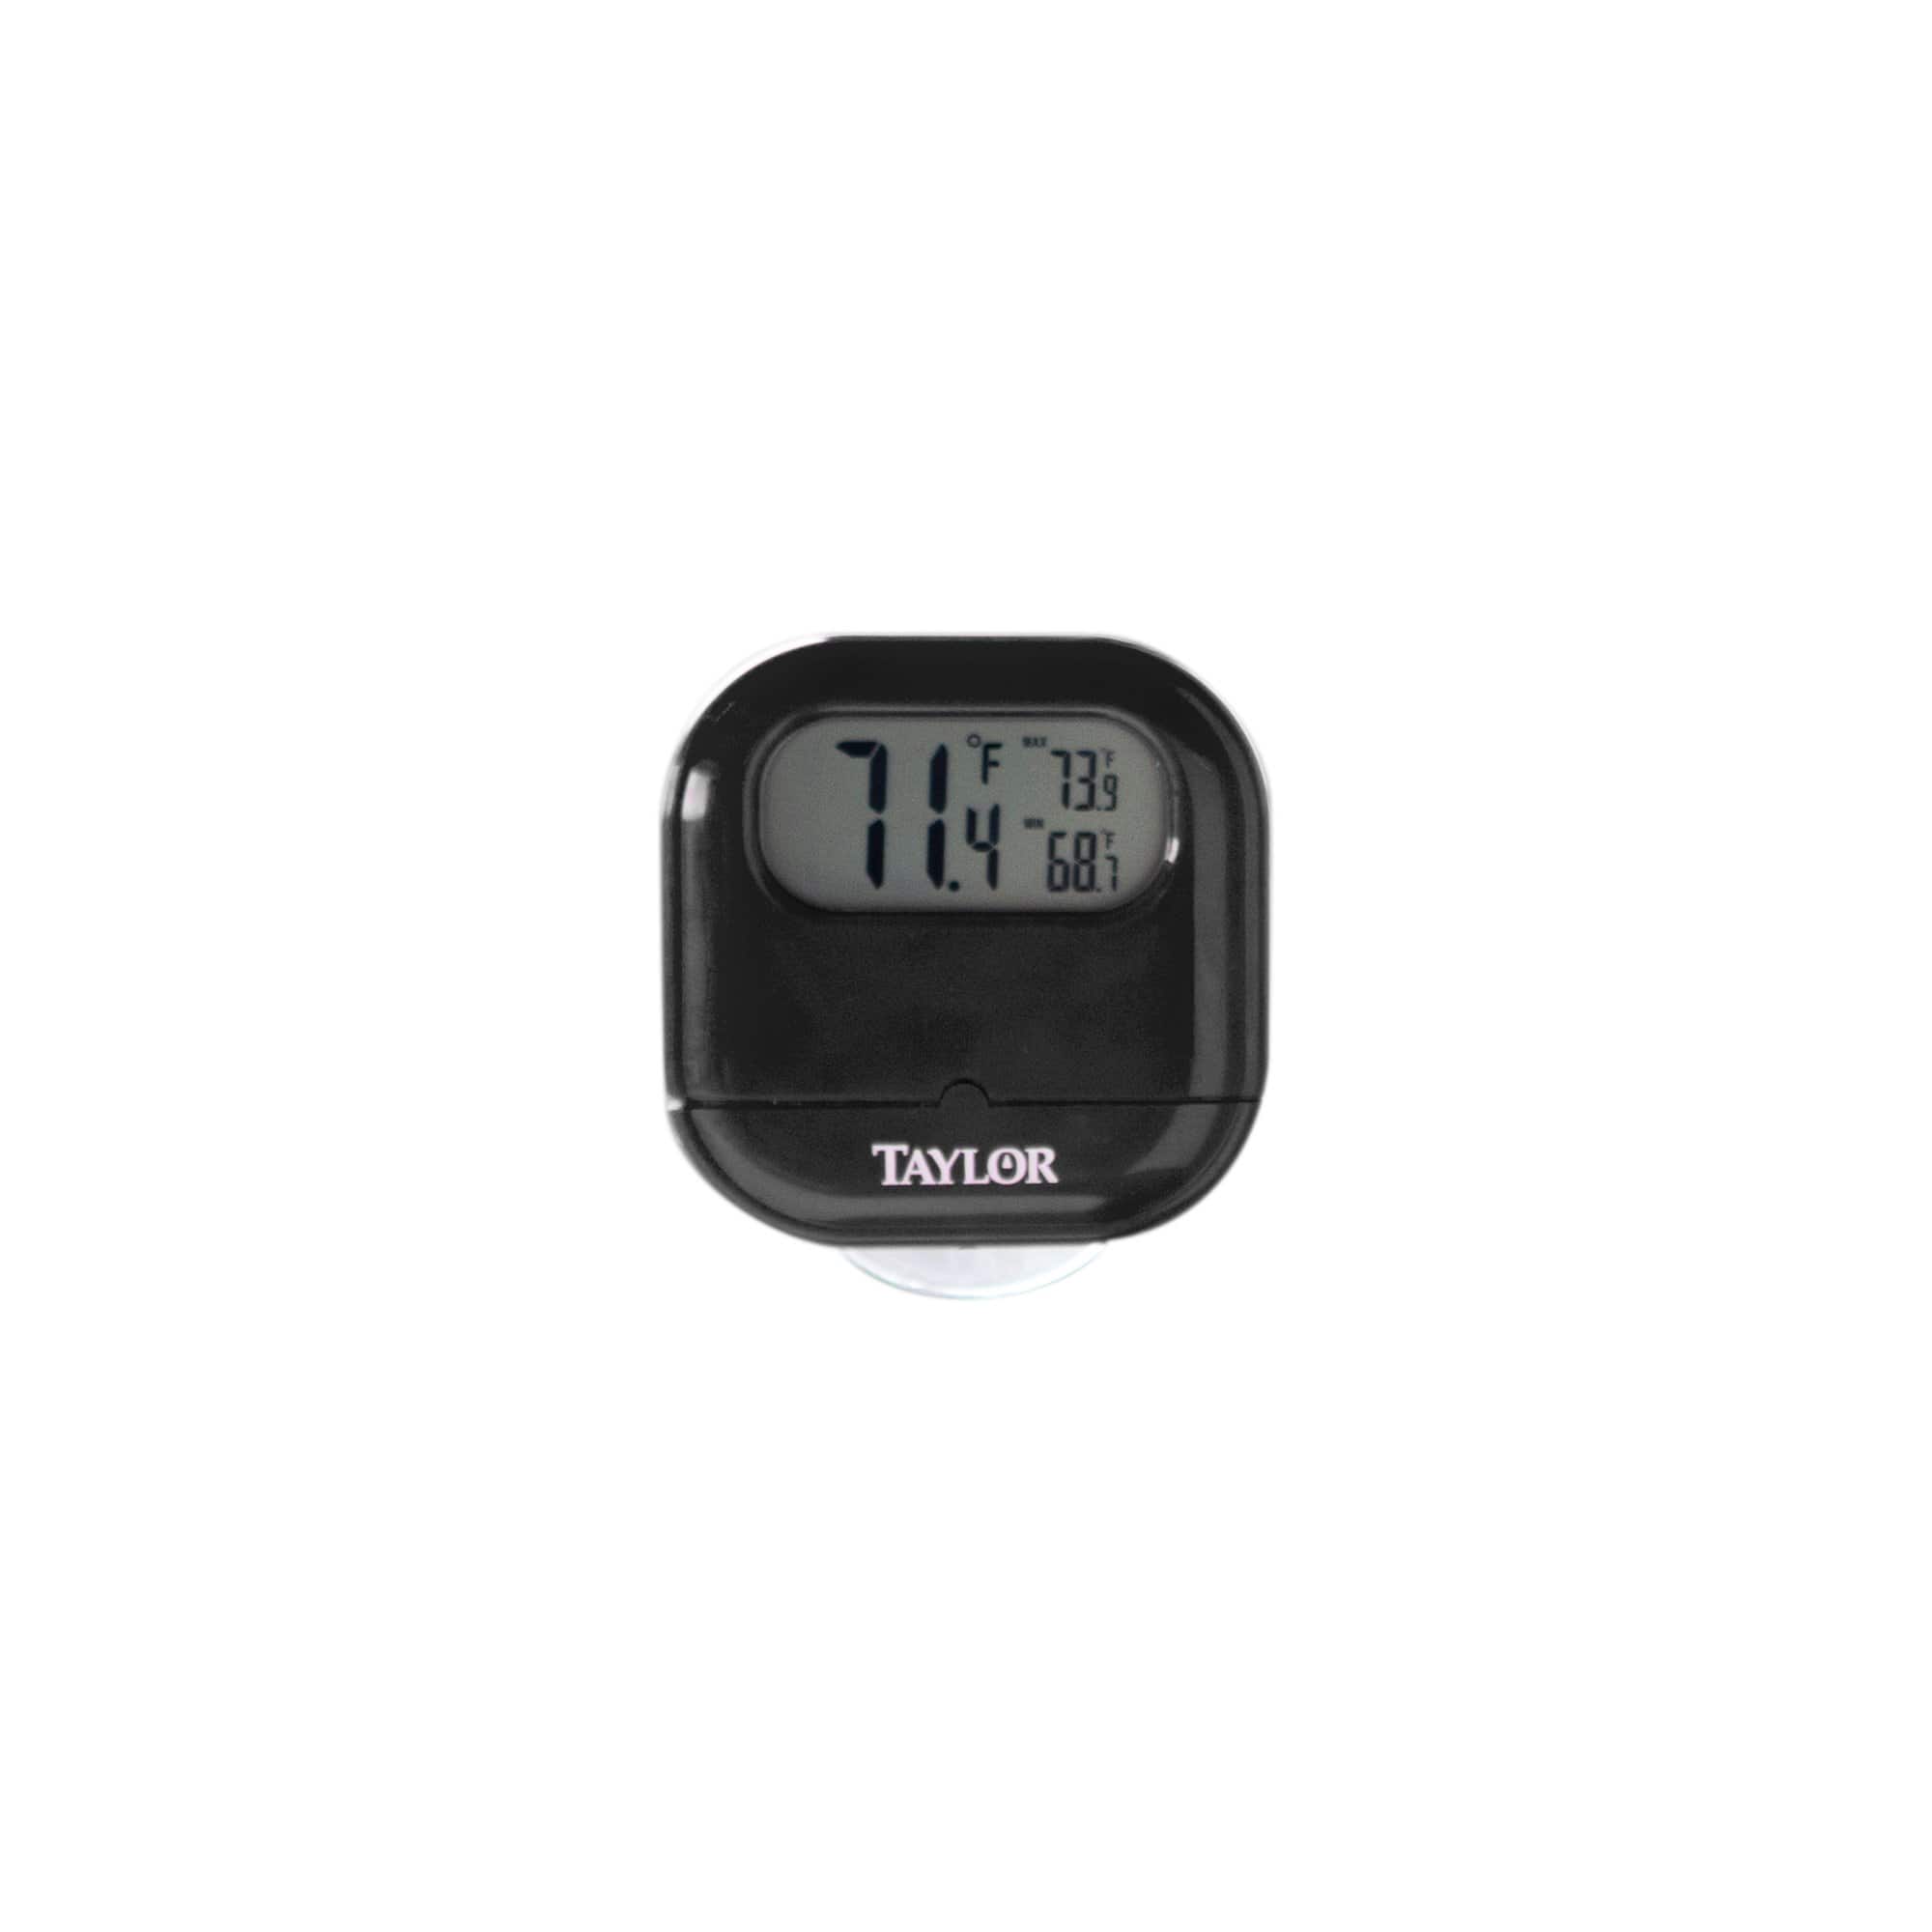 Taylor Digital Indoor & Outdoor Thermometer